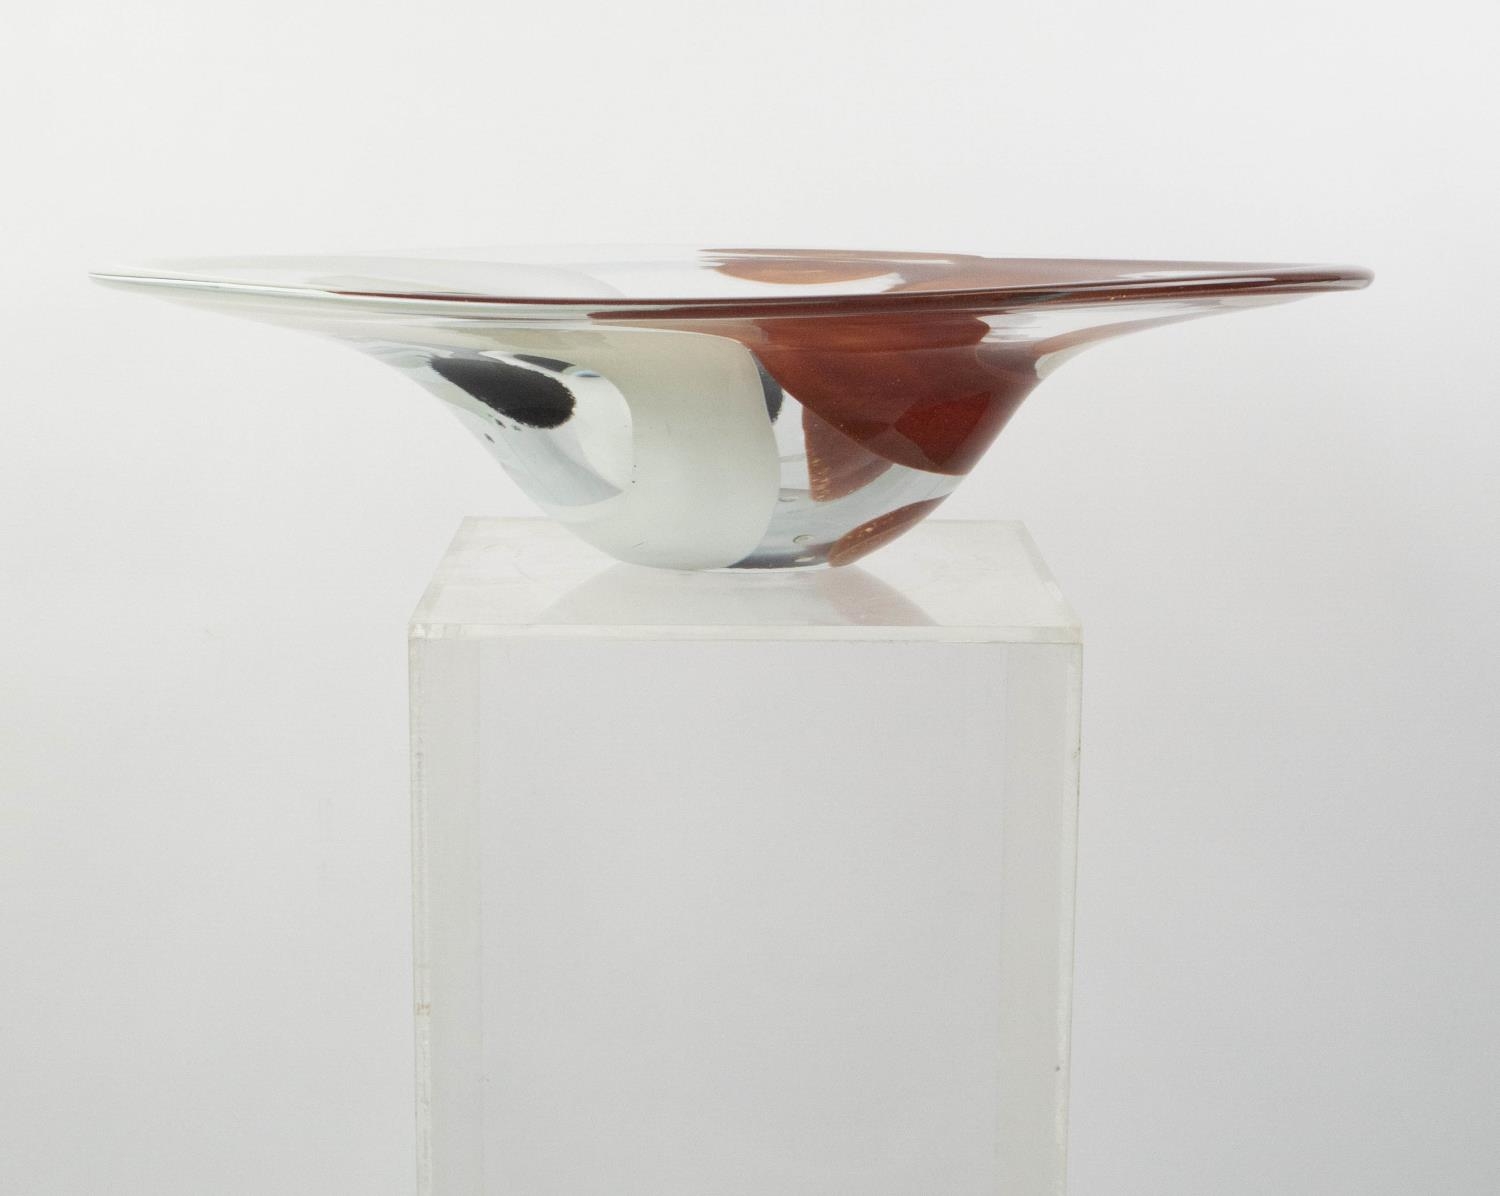 ART GLASS BOWL, late 20th century shaped with red, white and black design, 52cm L x 39cm W x 13cm H. - Image 2 of 8